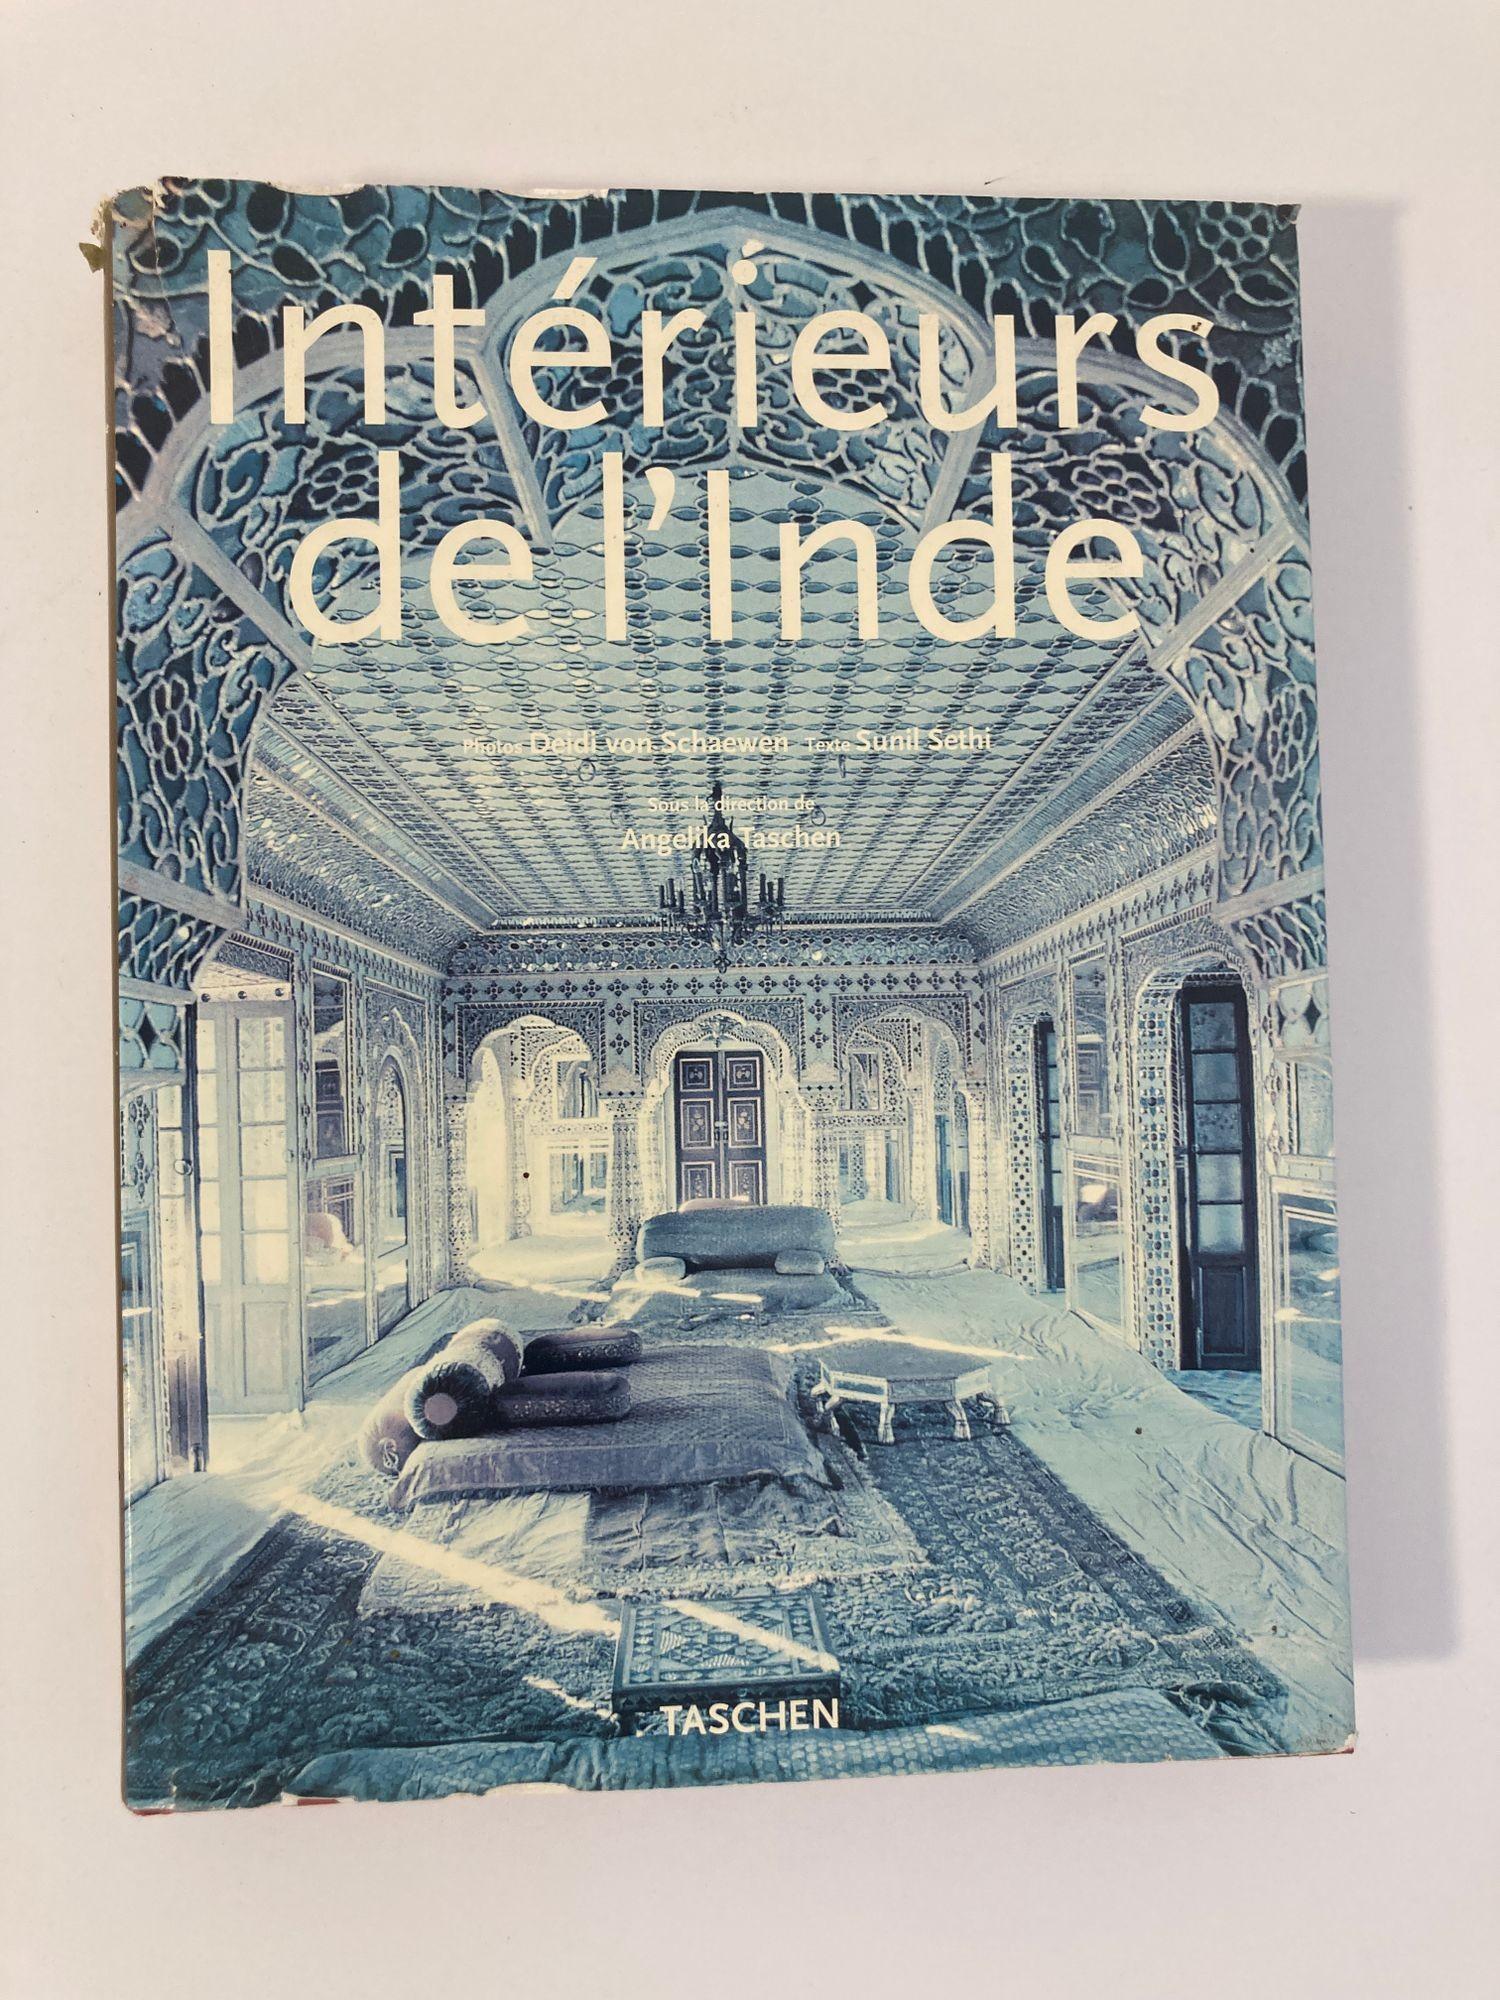 Indian Interiors Hardcover Book June 1, 1999. Taschen Interiors.
Indian Interiors by Sunil Sethi. Photographs by Deidi von Schaewen. Vintage hardcover book.
A sumptuous photographic tour of Indian interiors, from river houseboats in Kashmir to the